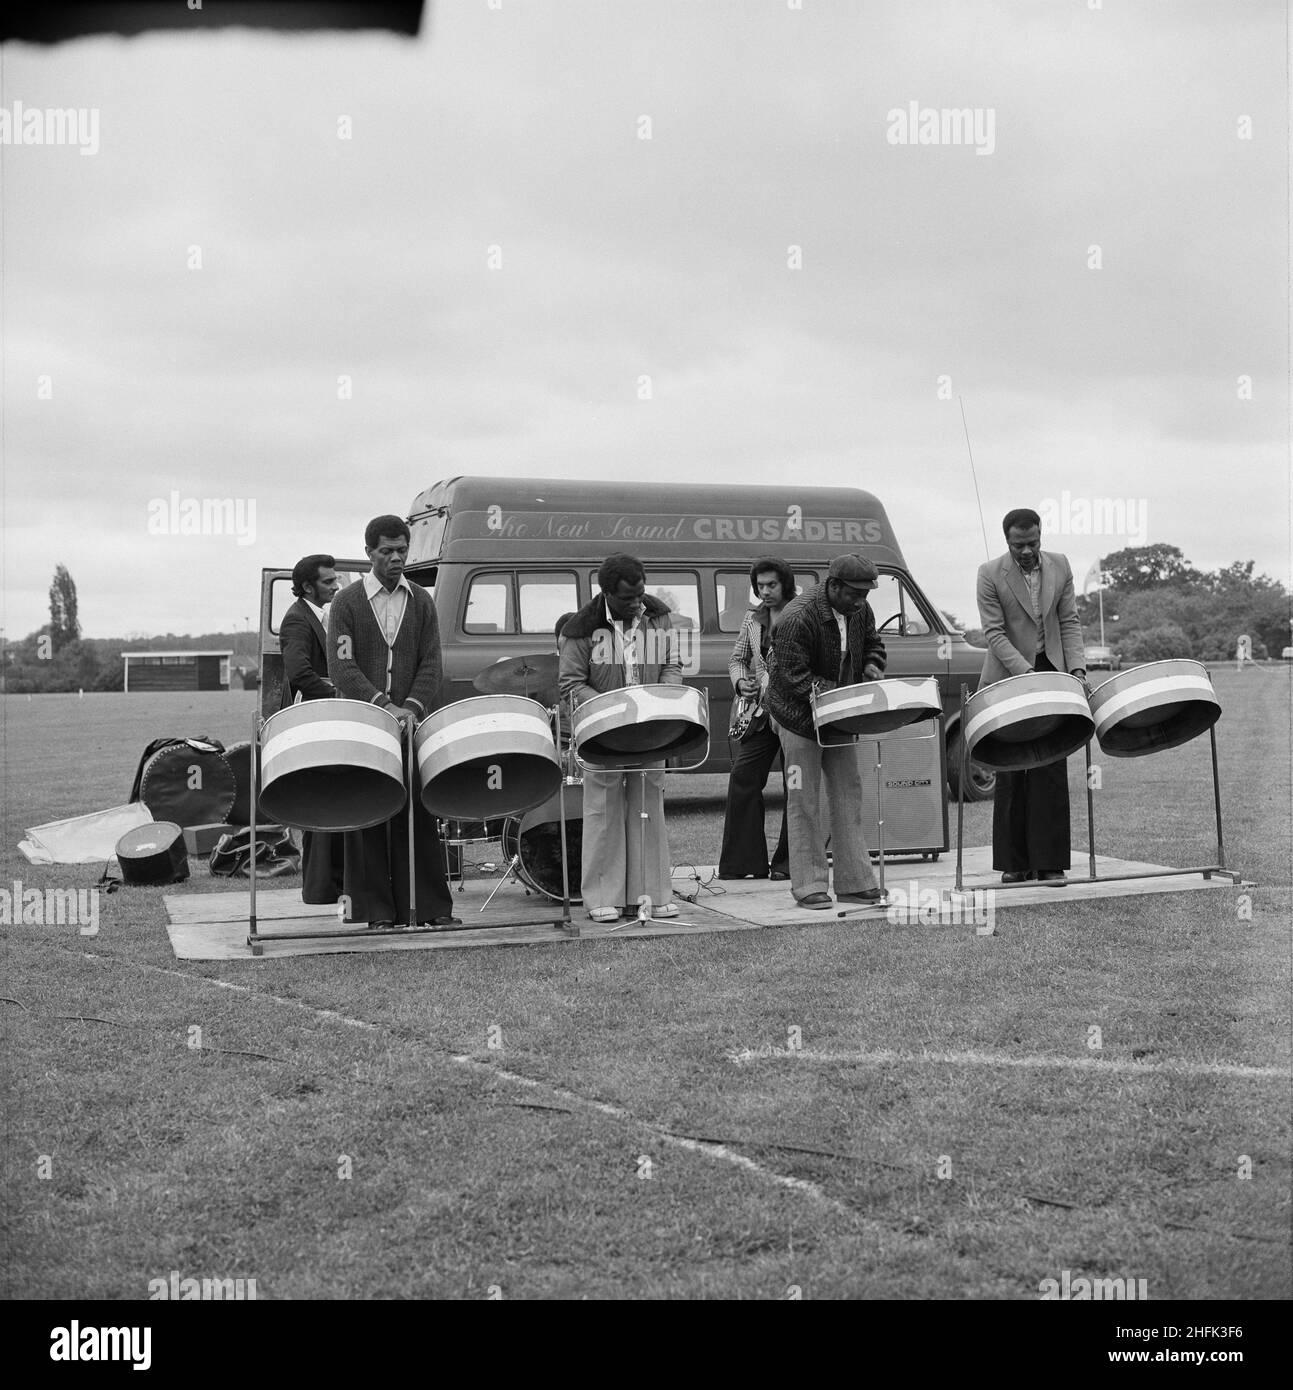 Laing Sports Ground, Rowley Lane, Elstree, Barnet, London, 18/06/1977. A steel band, The New Sound Crusaders, setting up their instruments for the annual Laing Gala Day held at the Elstree Sports Ground. Stock Photo